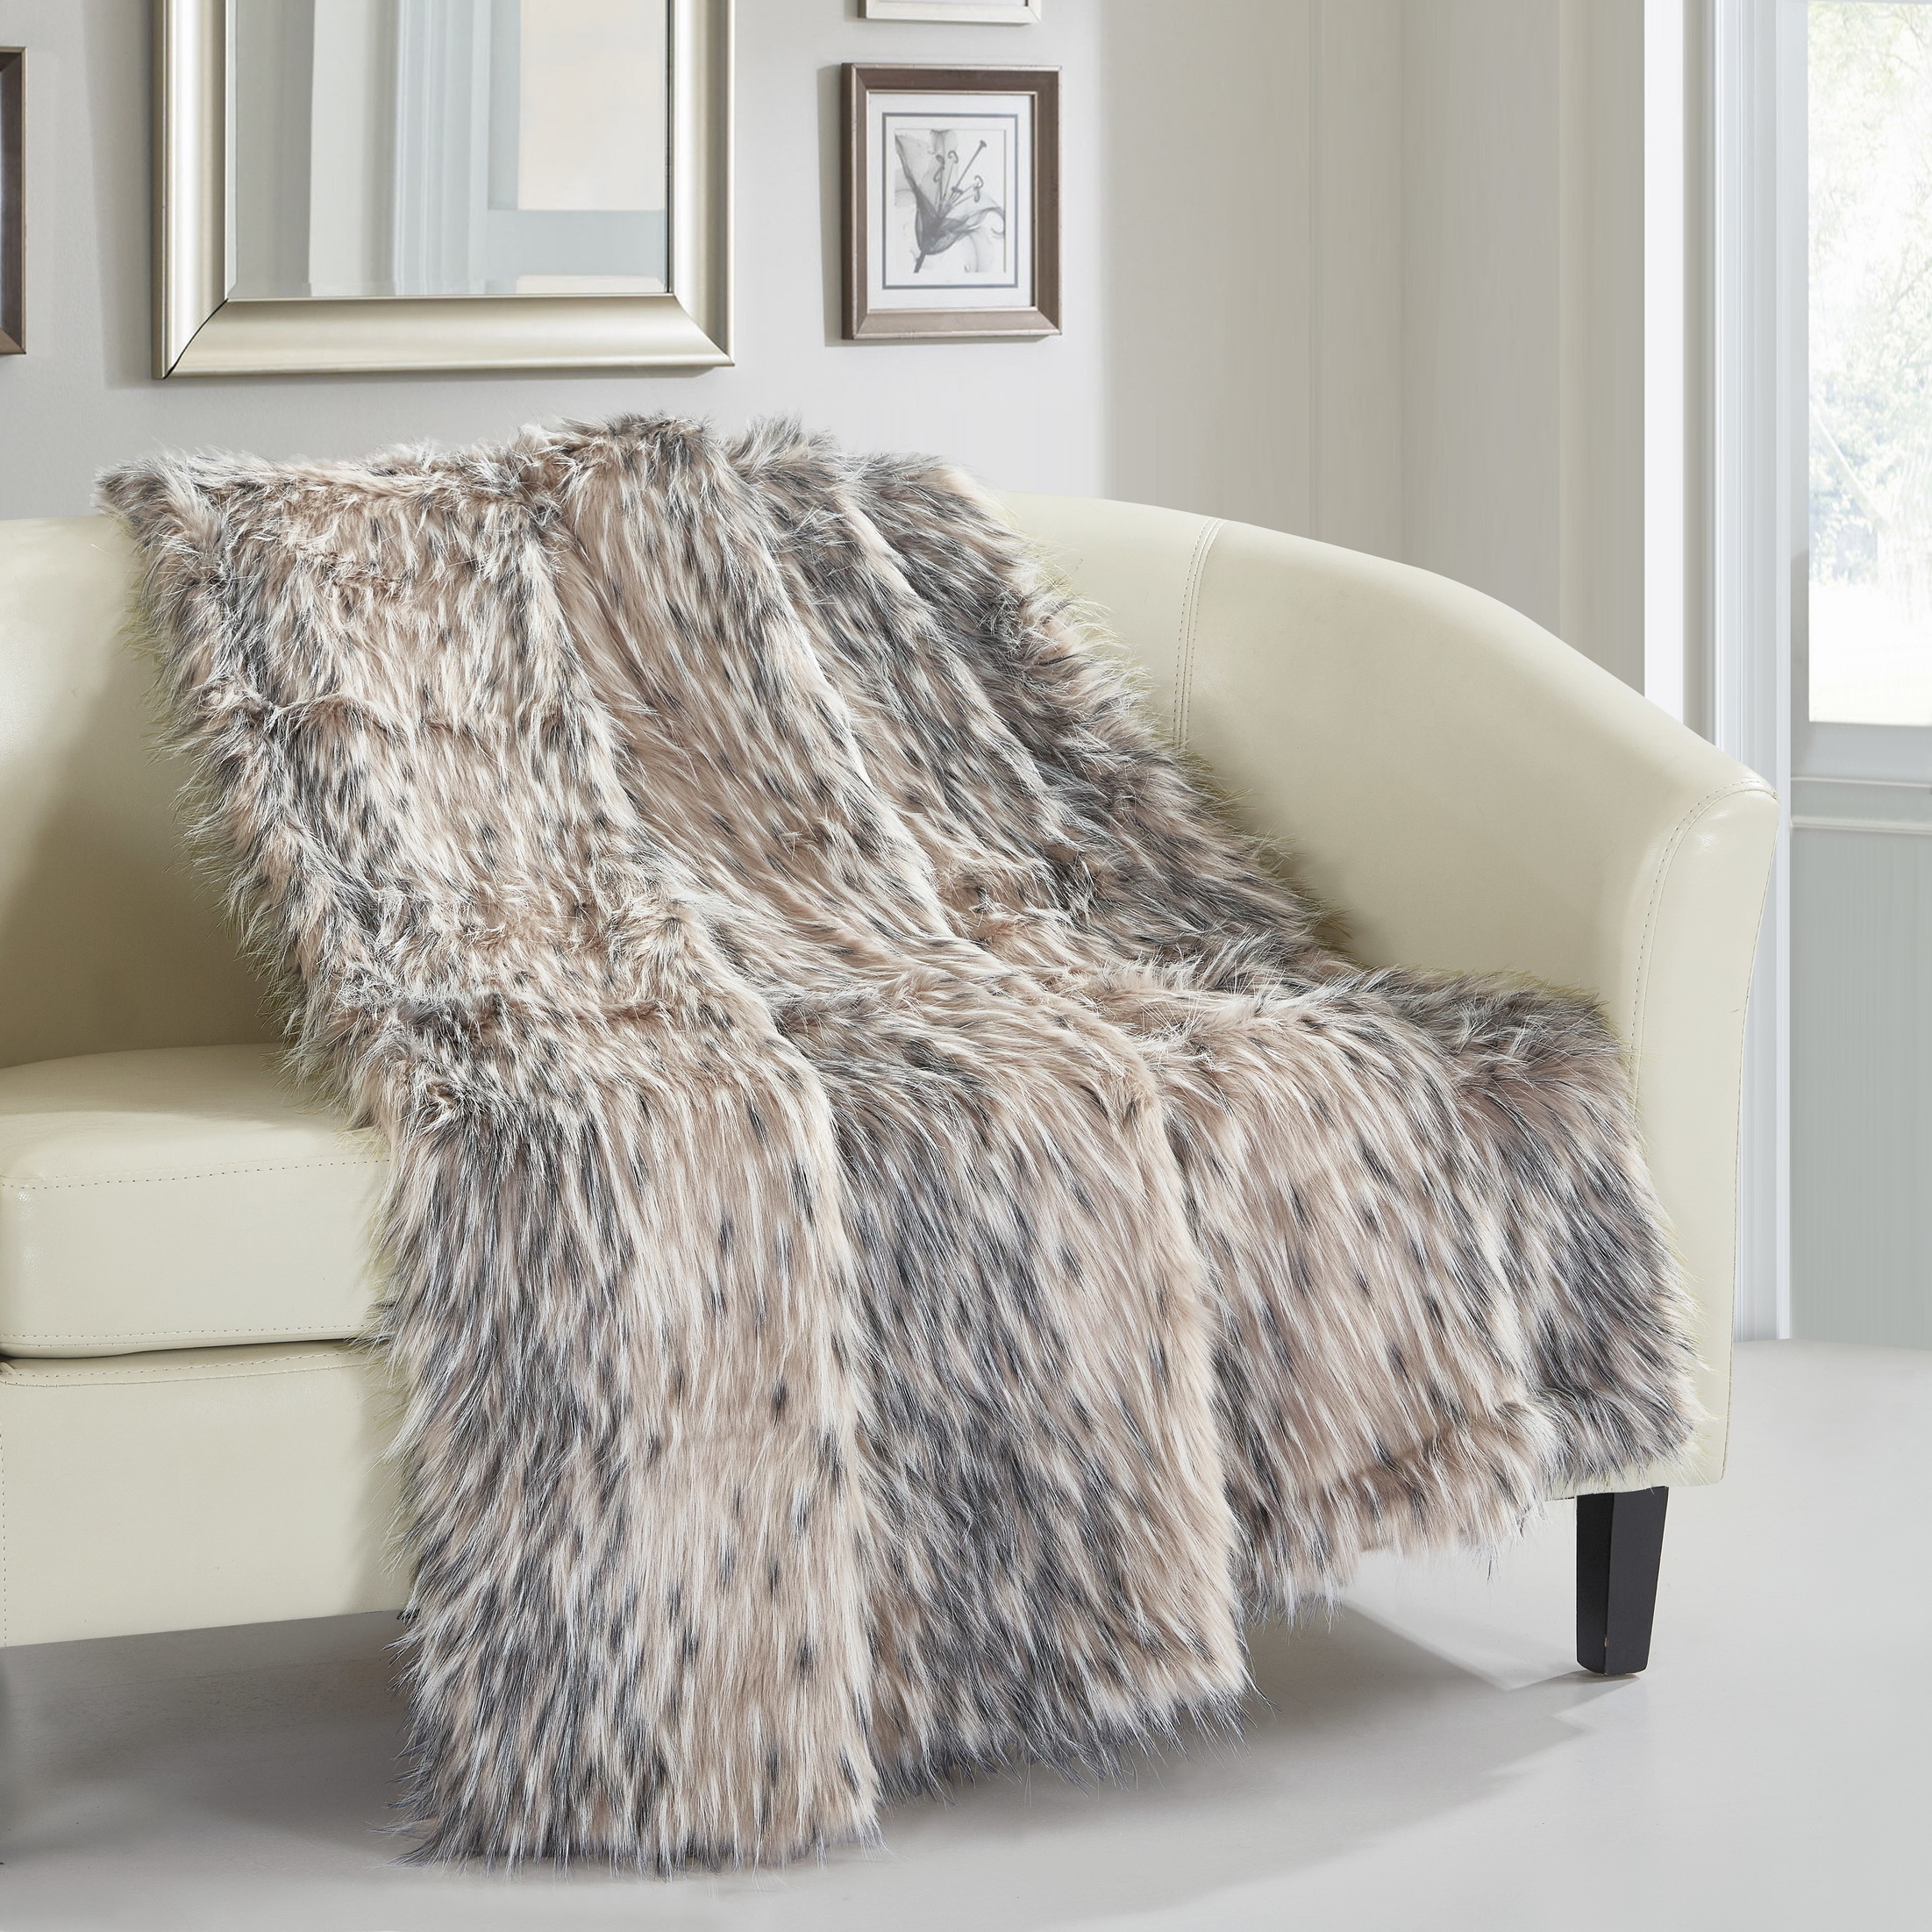 Piolo Throw Blanket Cozy Super Soft Ultra Plush Micromink Backing Decorative Two-Tone Design - Beige